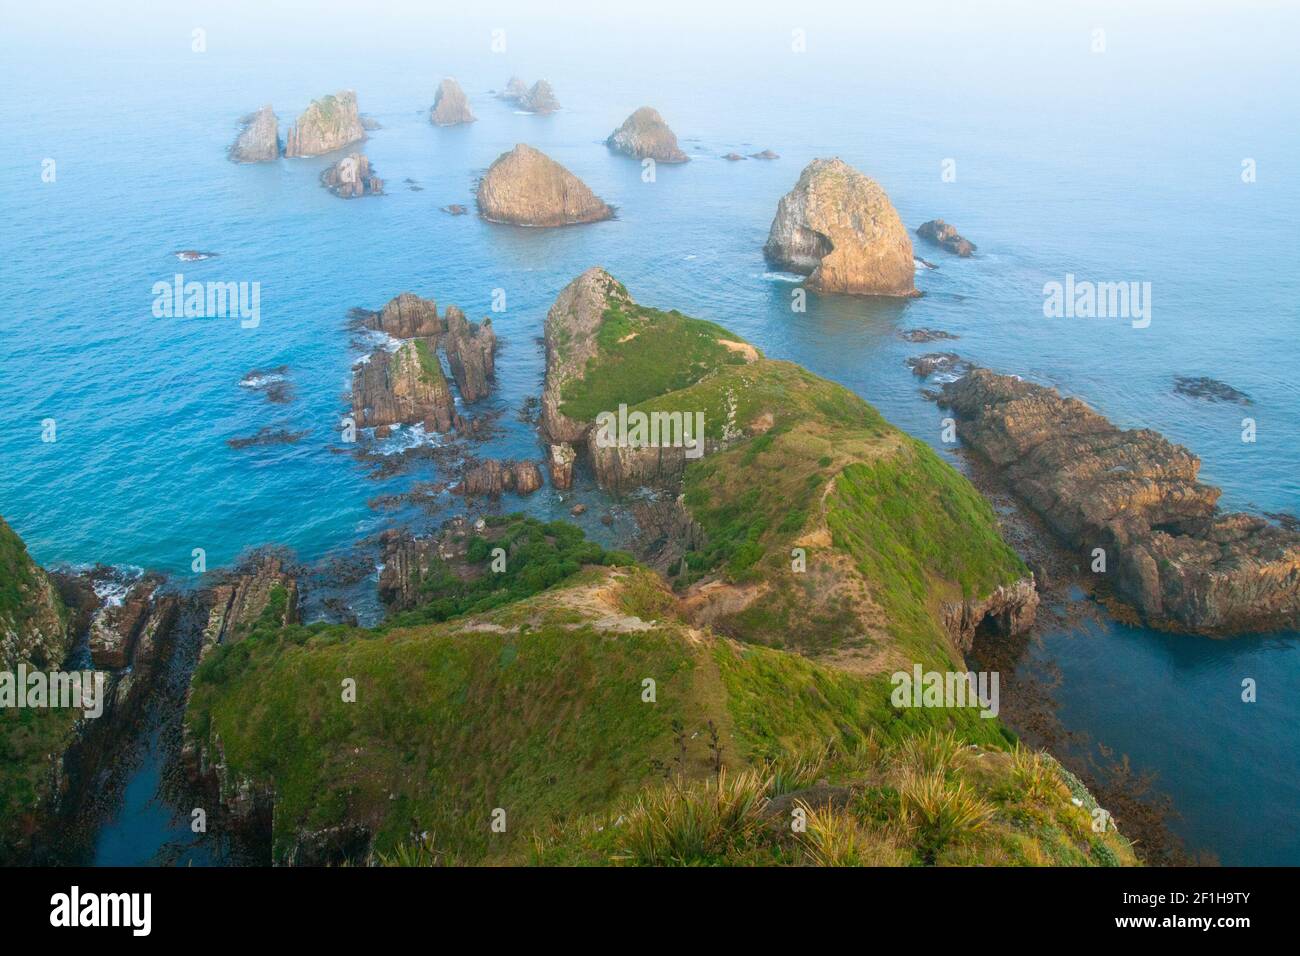 The nuggets- rocky islets of Nugget Point New Zealand, wild Southern Pacific Ocean at the Catlins coast, South Island of New Zealand Stock Photo